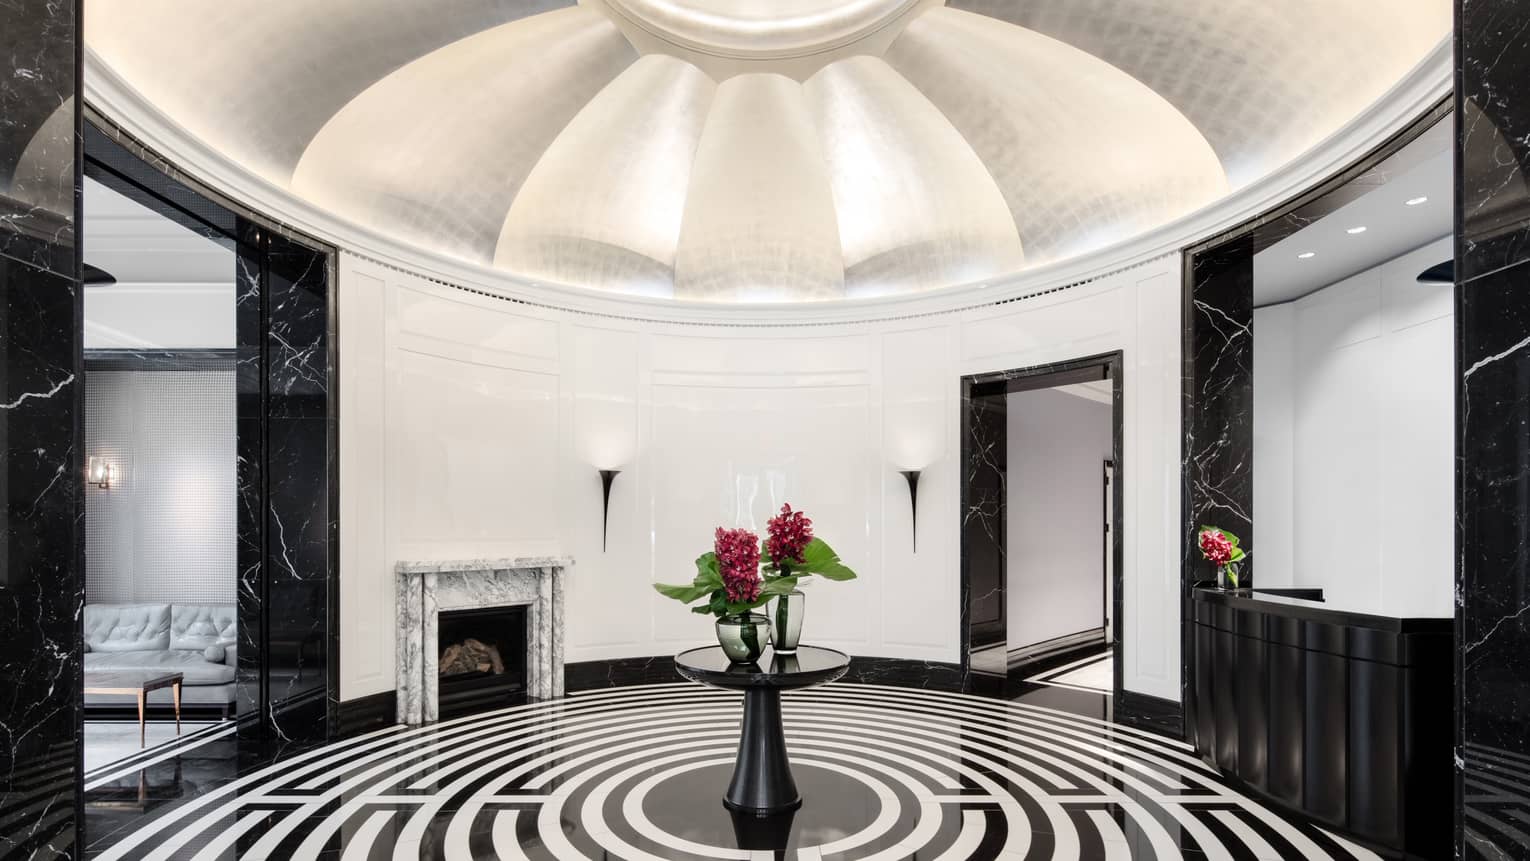 Dramatic white dome ceiling over rotunda with black-and-white maze flooring, red flowers on table